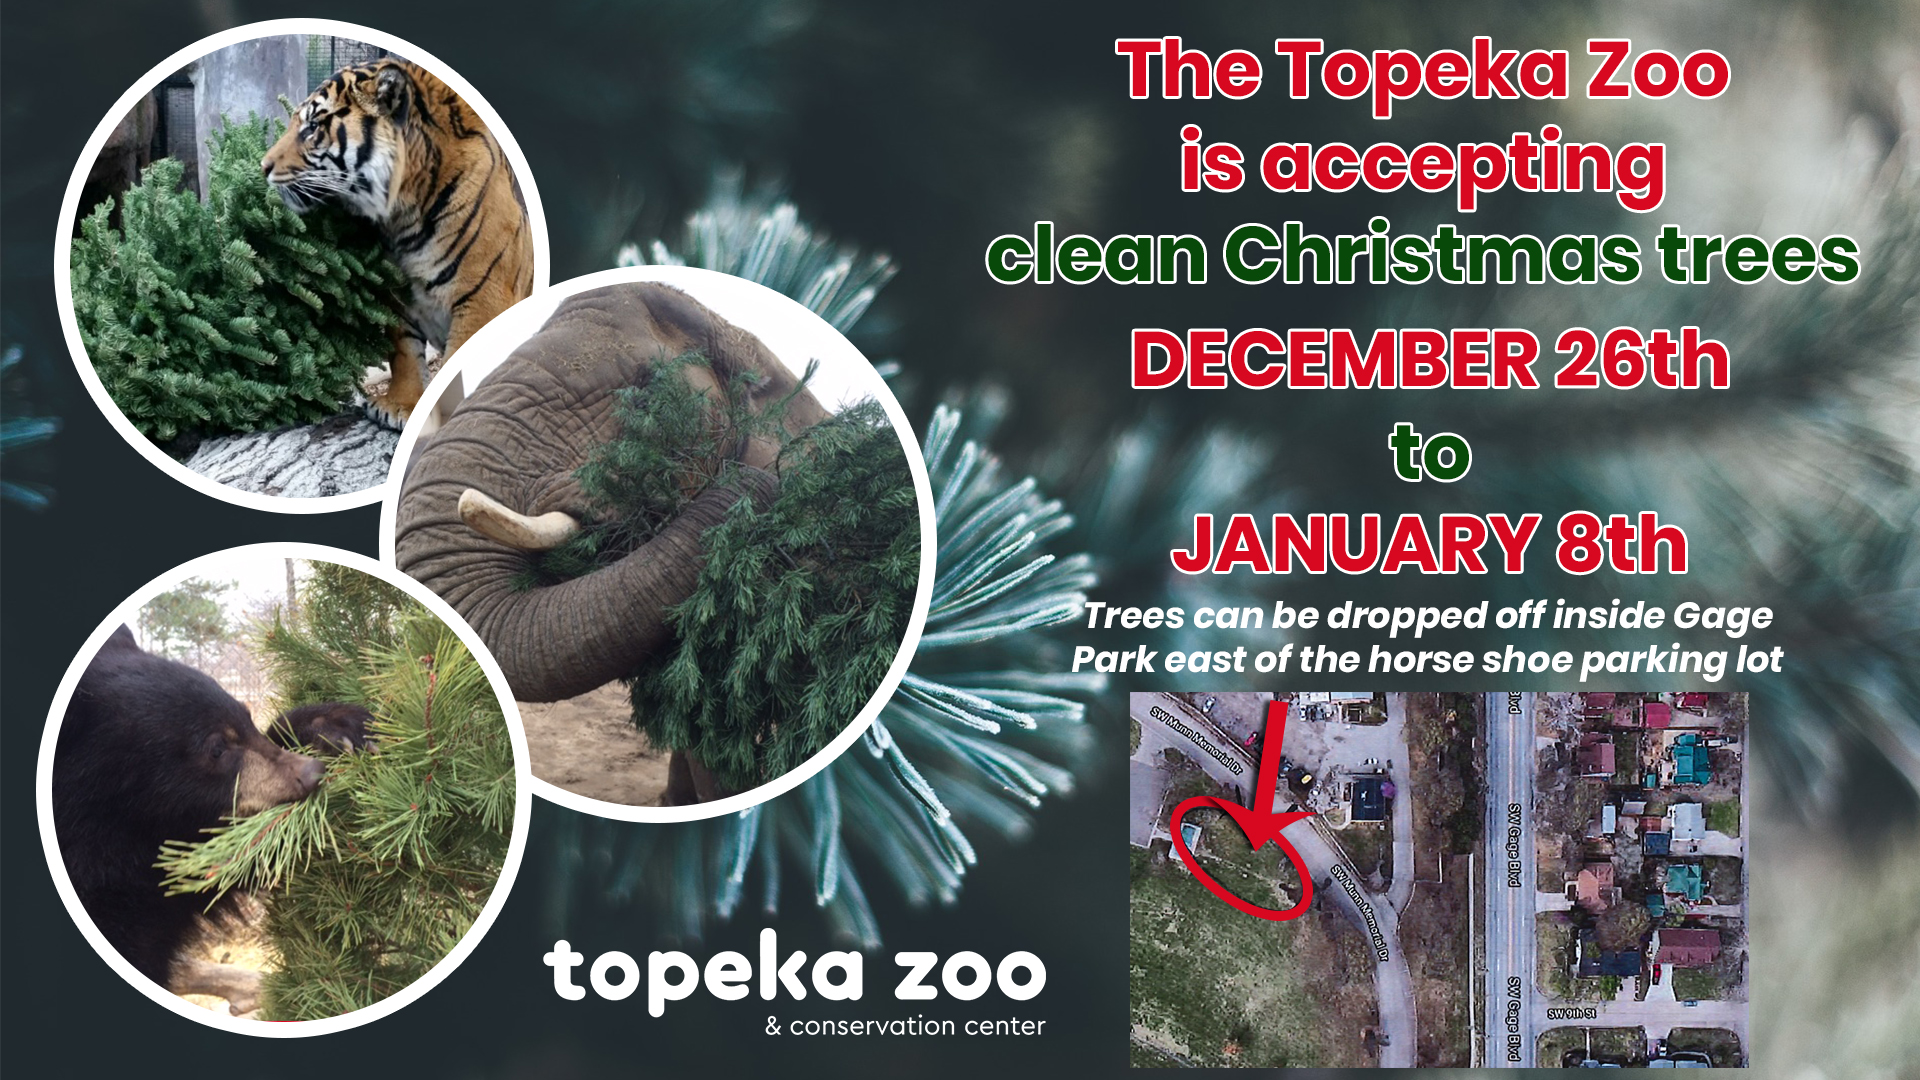 Topeka Zoo Welcomes Used Christmas Trees for Animal Enrichment